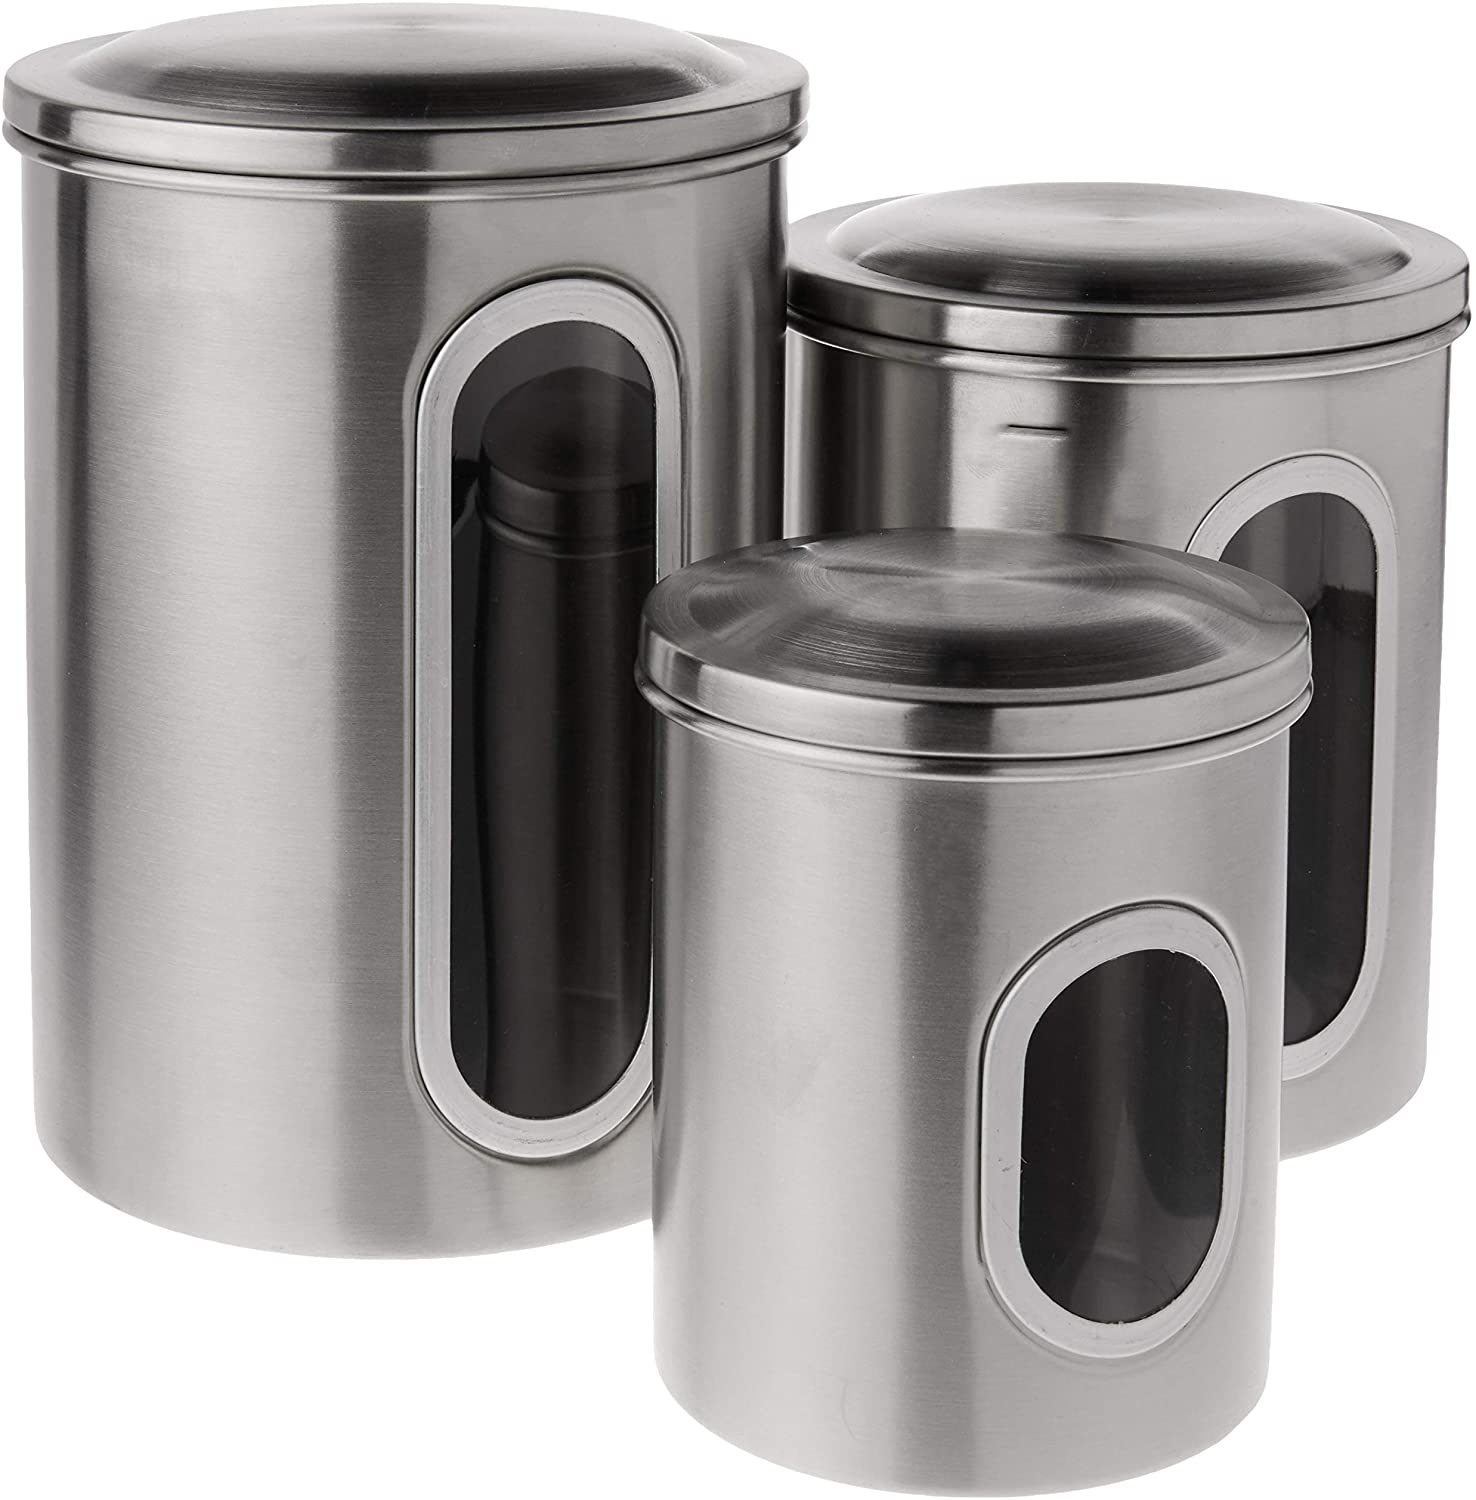 Foxrun Stainless Steel Canister Set